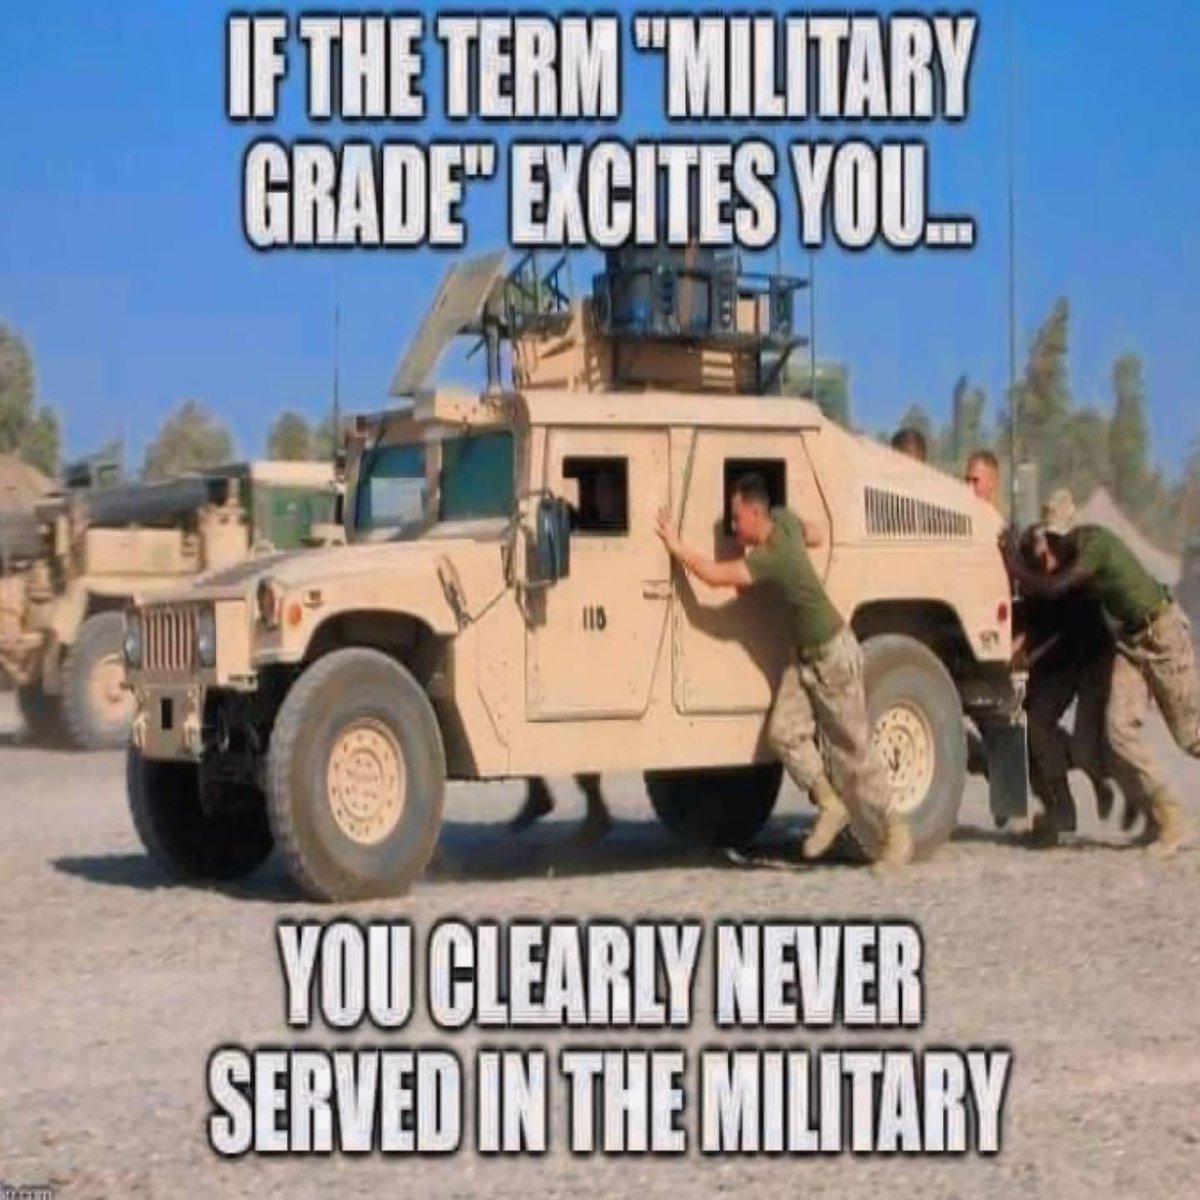 Accurate. If you think “military grade” is a good thing, you’re weapons grade stupid.